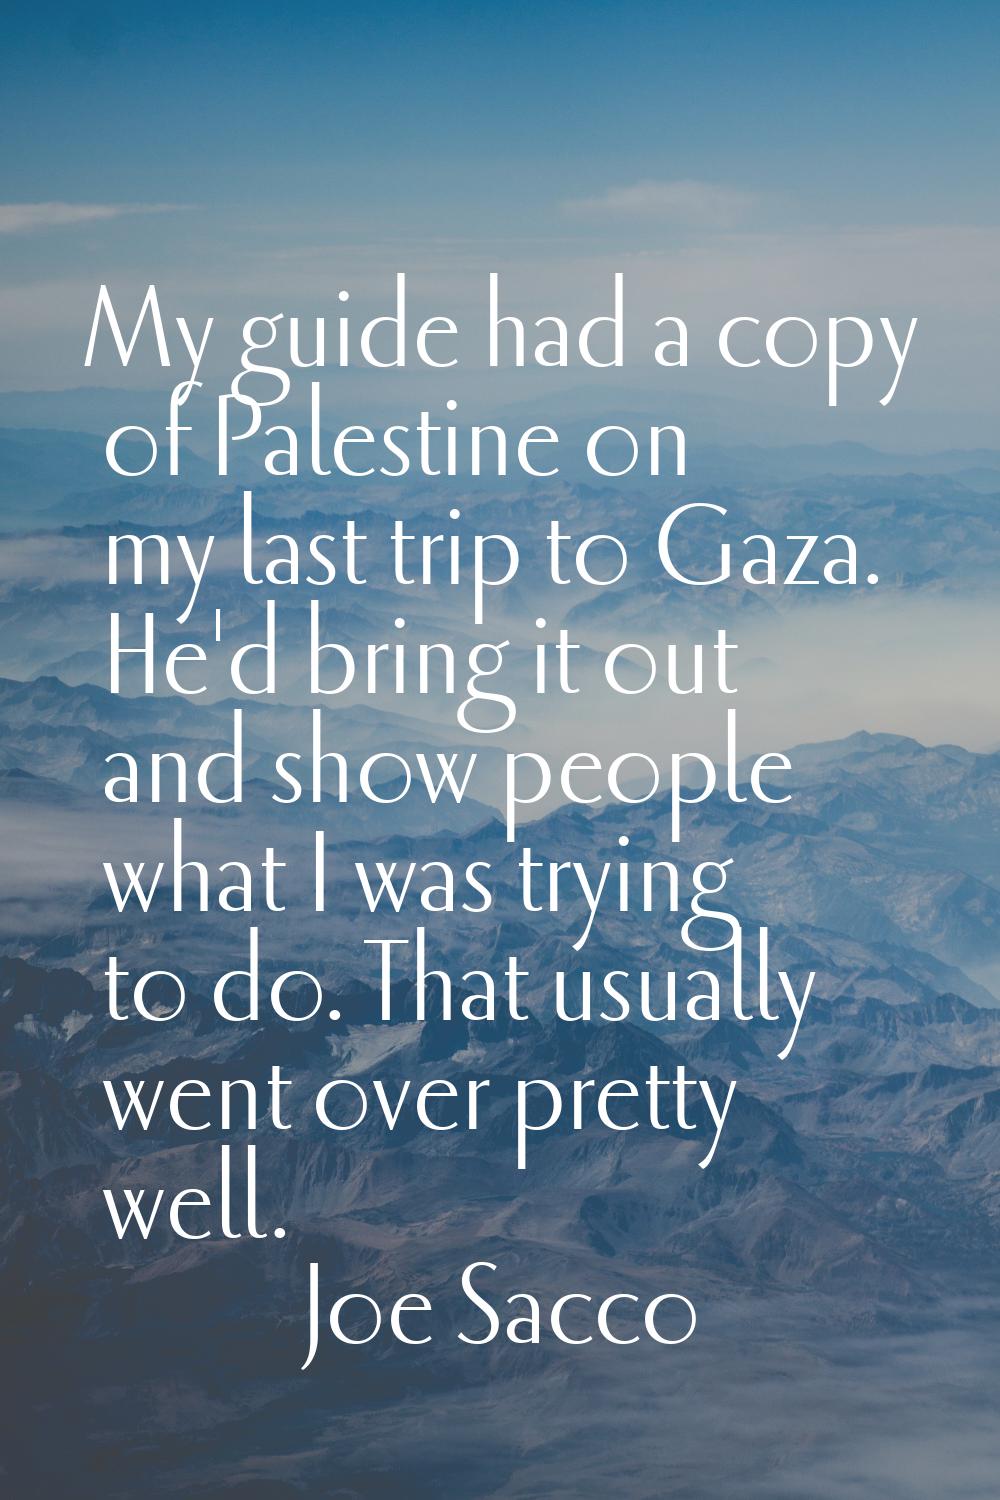 My guide had a copy of Palestine on my last trip to Gaza. He'd bring it out and show people what I 